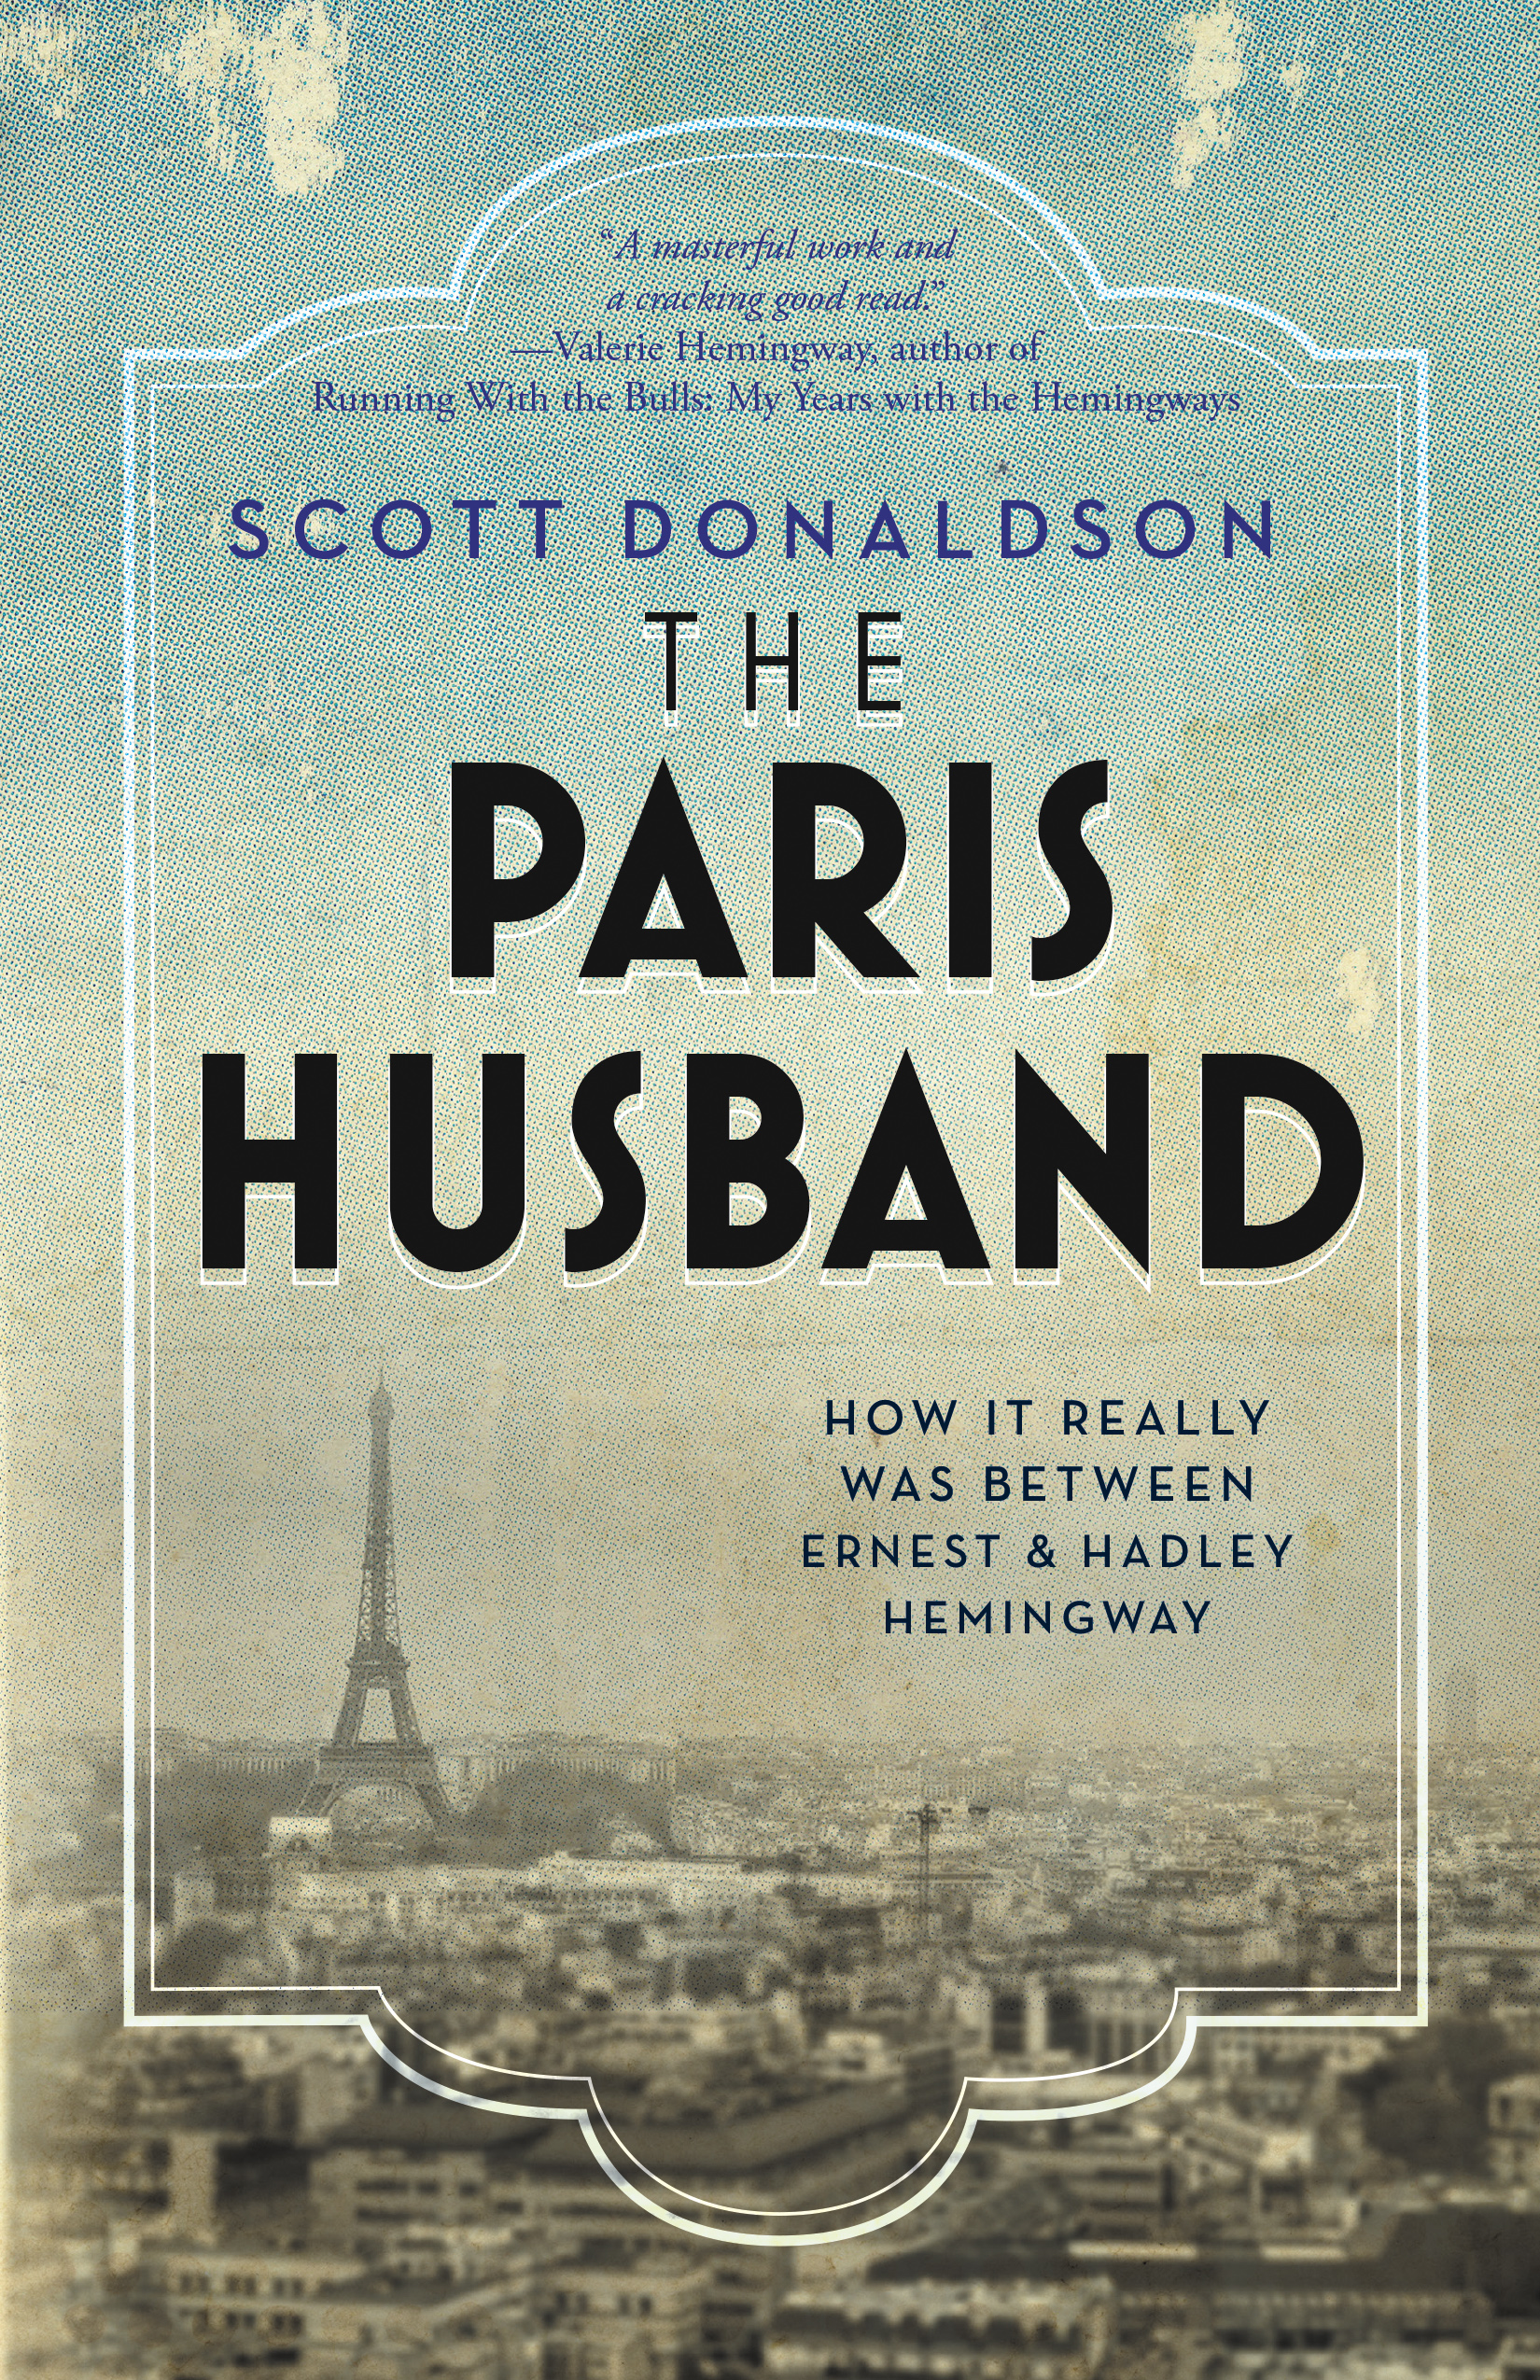 FREE: The Paris Husband: How It Really Was Between Ernest and Hadley Hemingway by Scott Donaldson